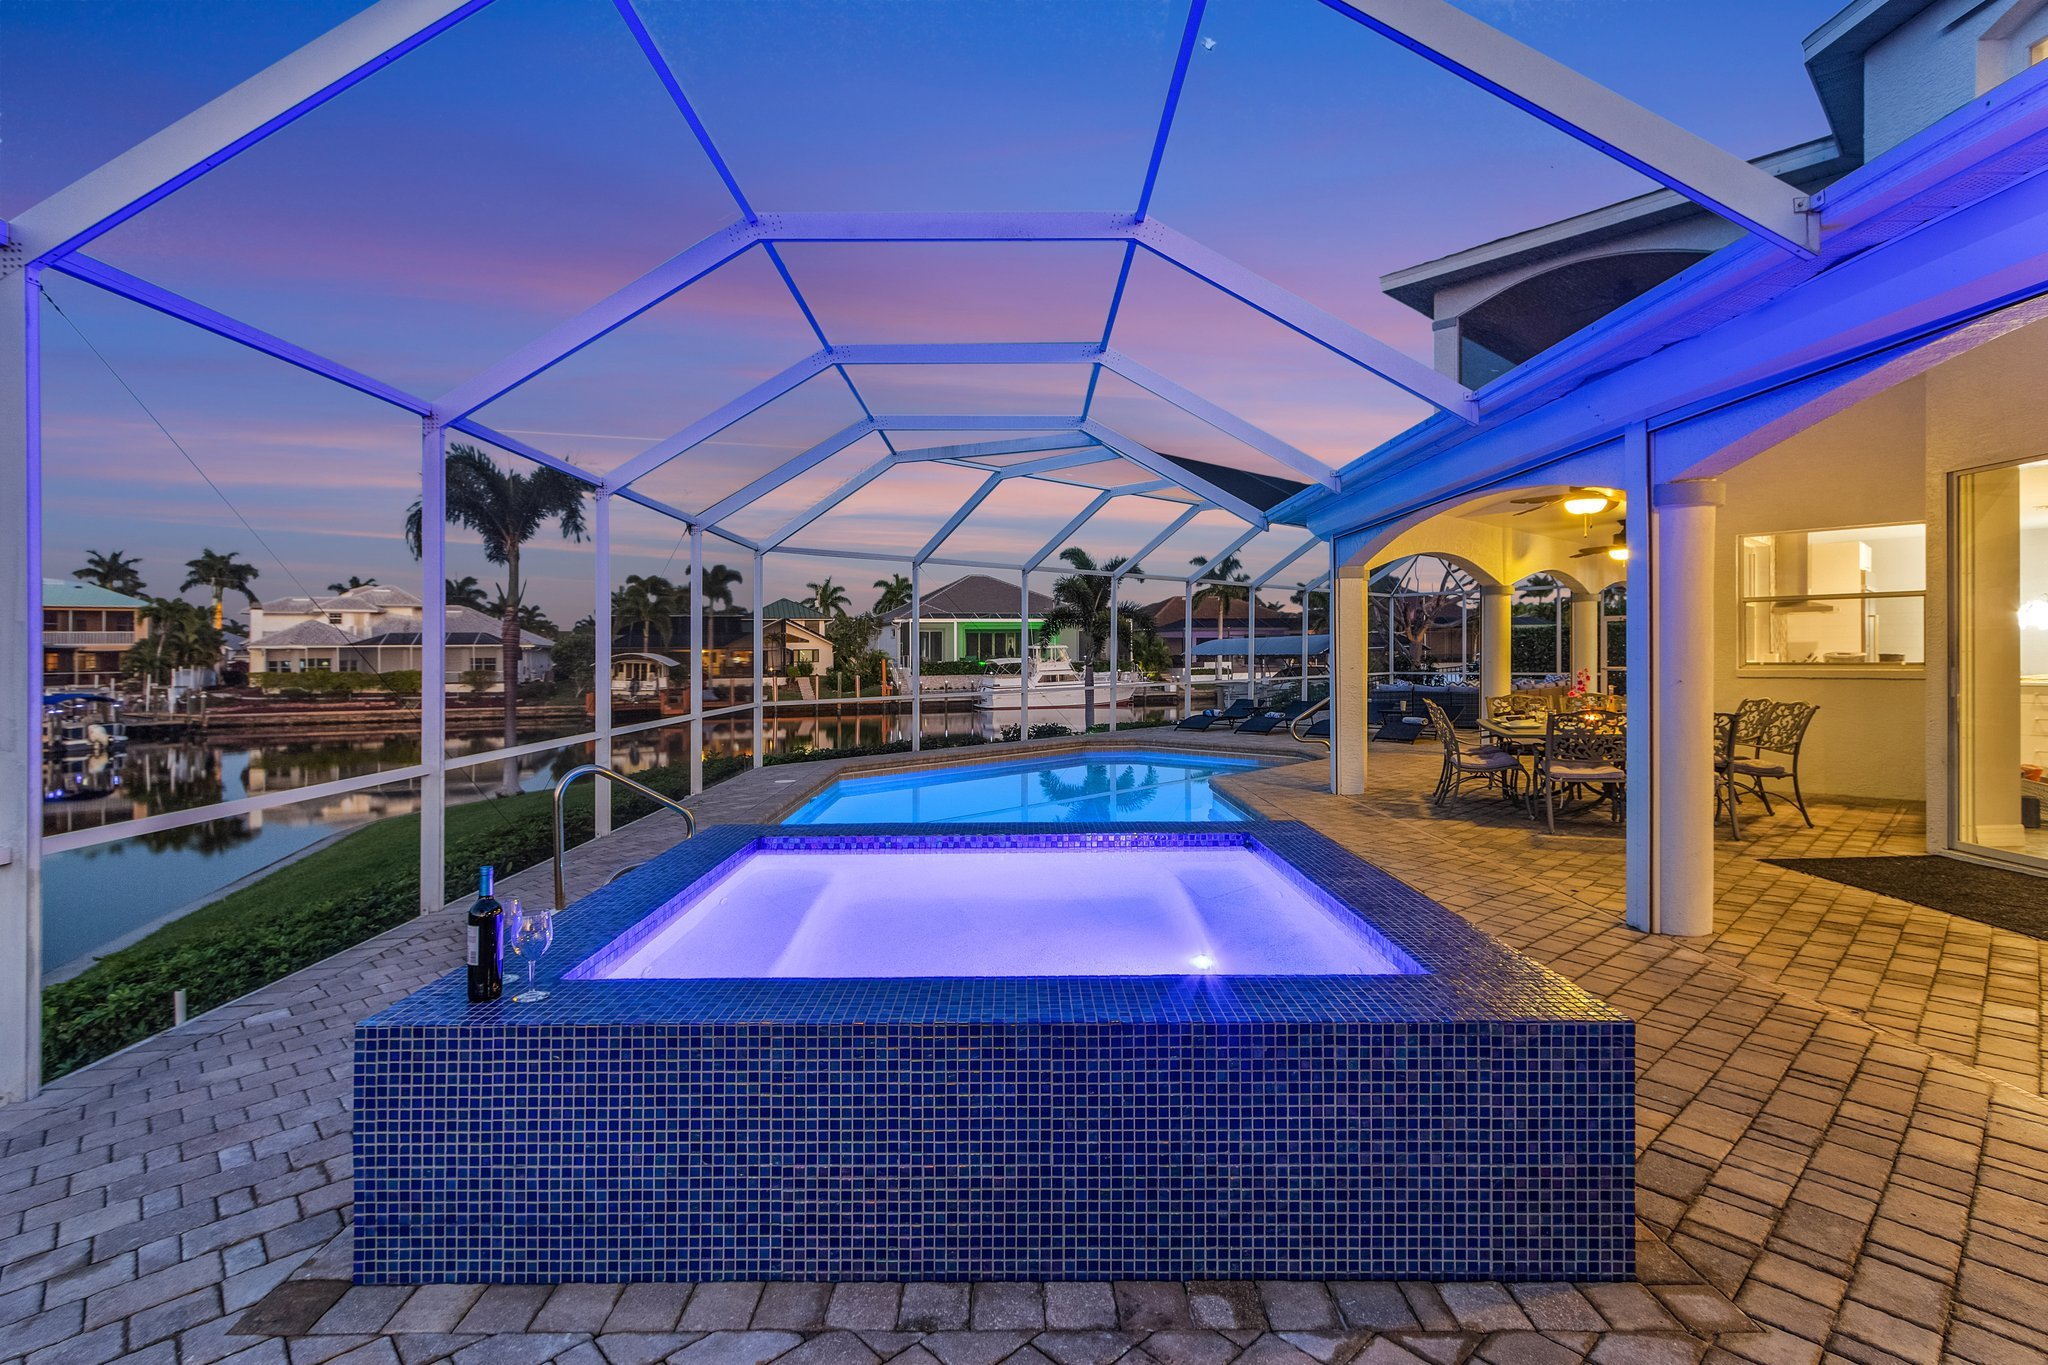 Property Image 1 - Villa Whispering Palms, Cape Coral